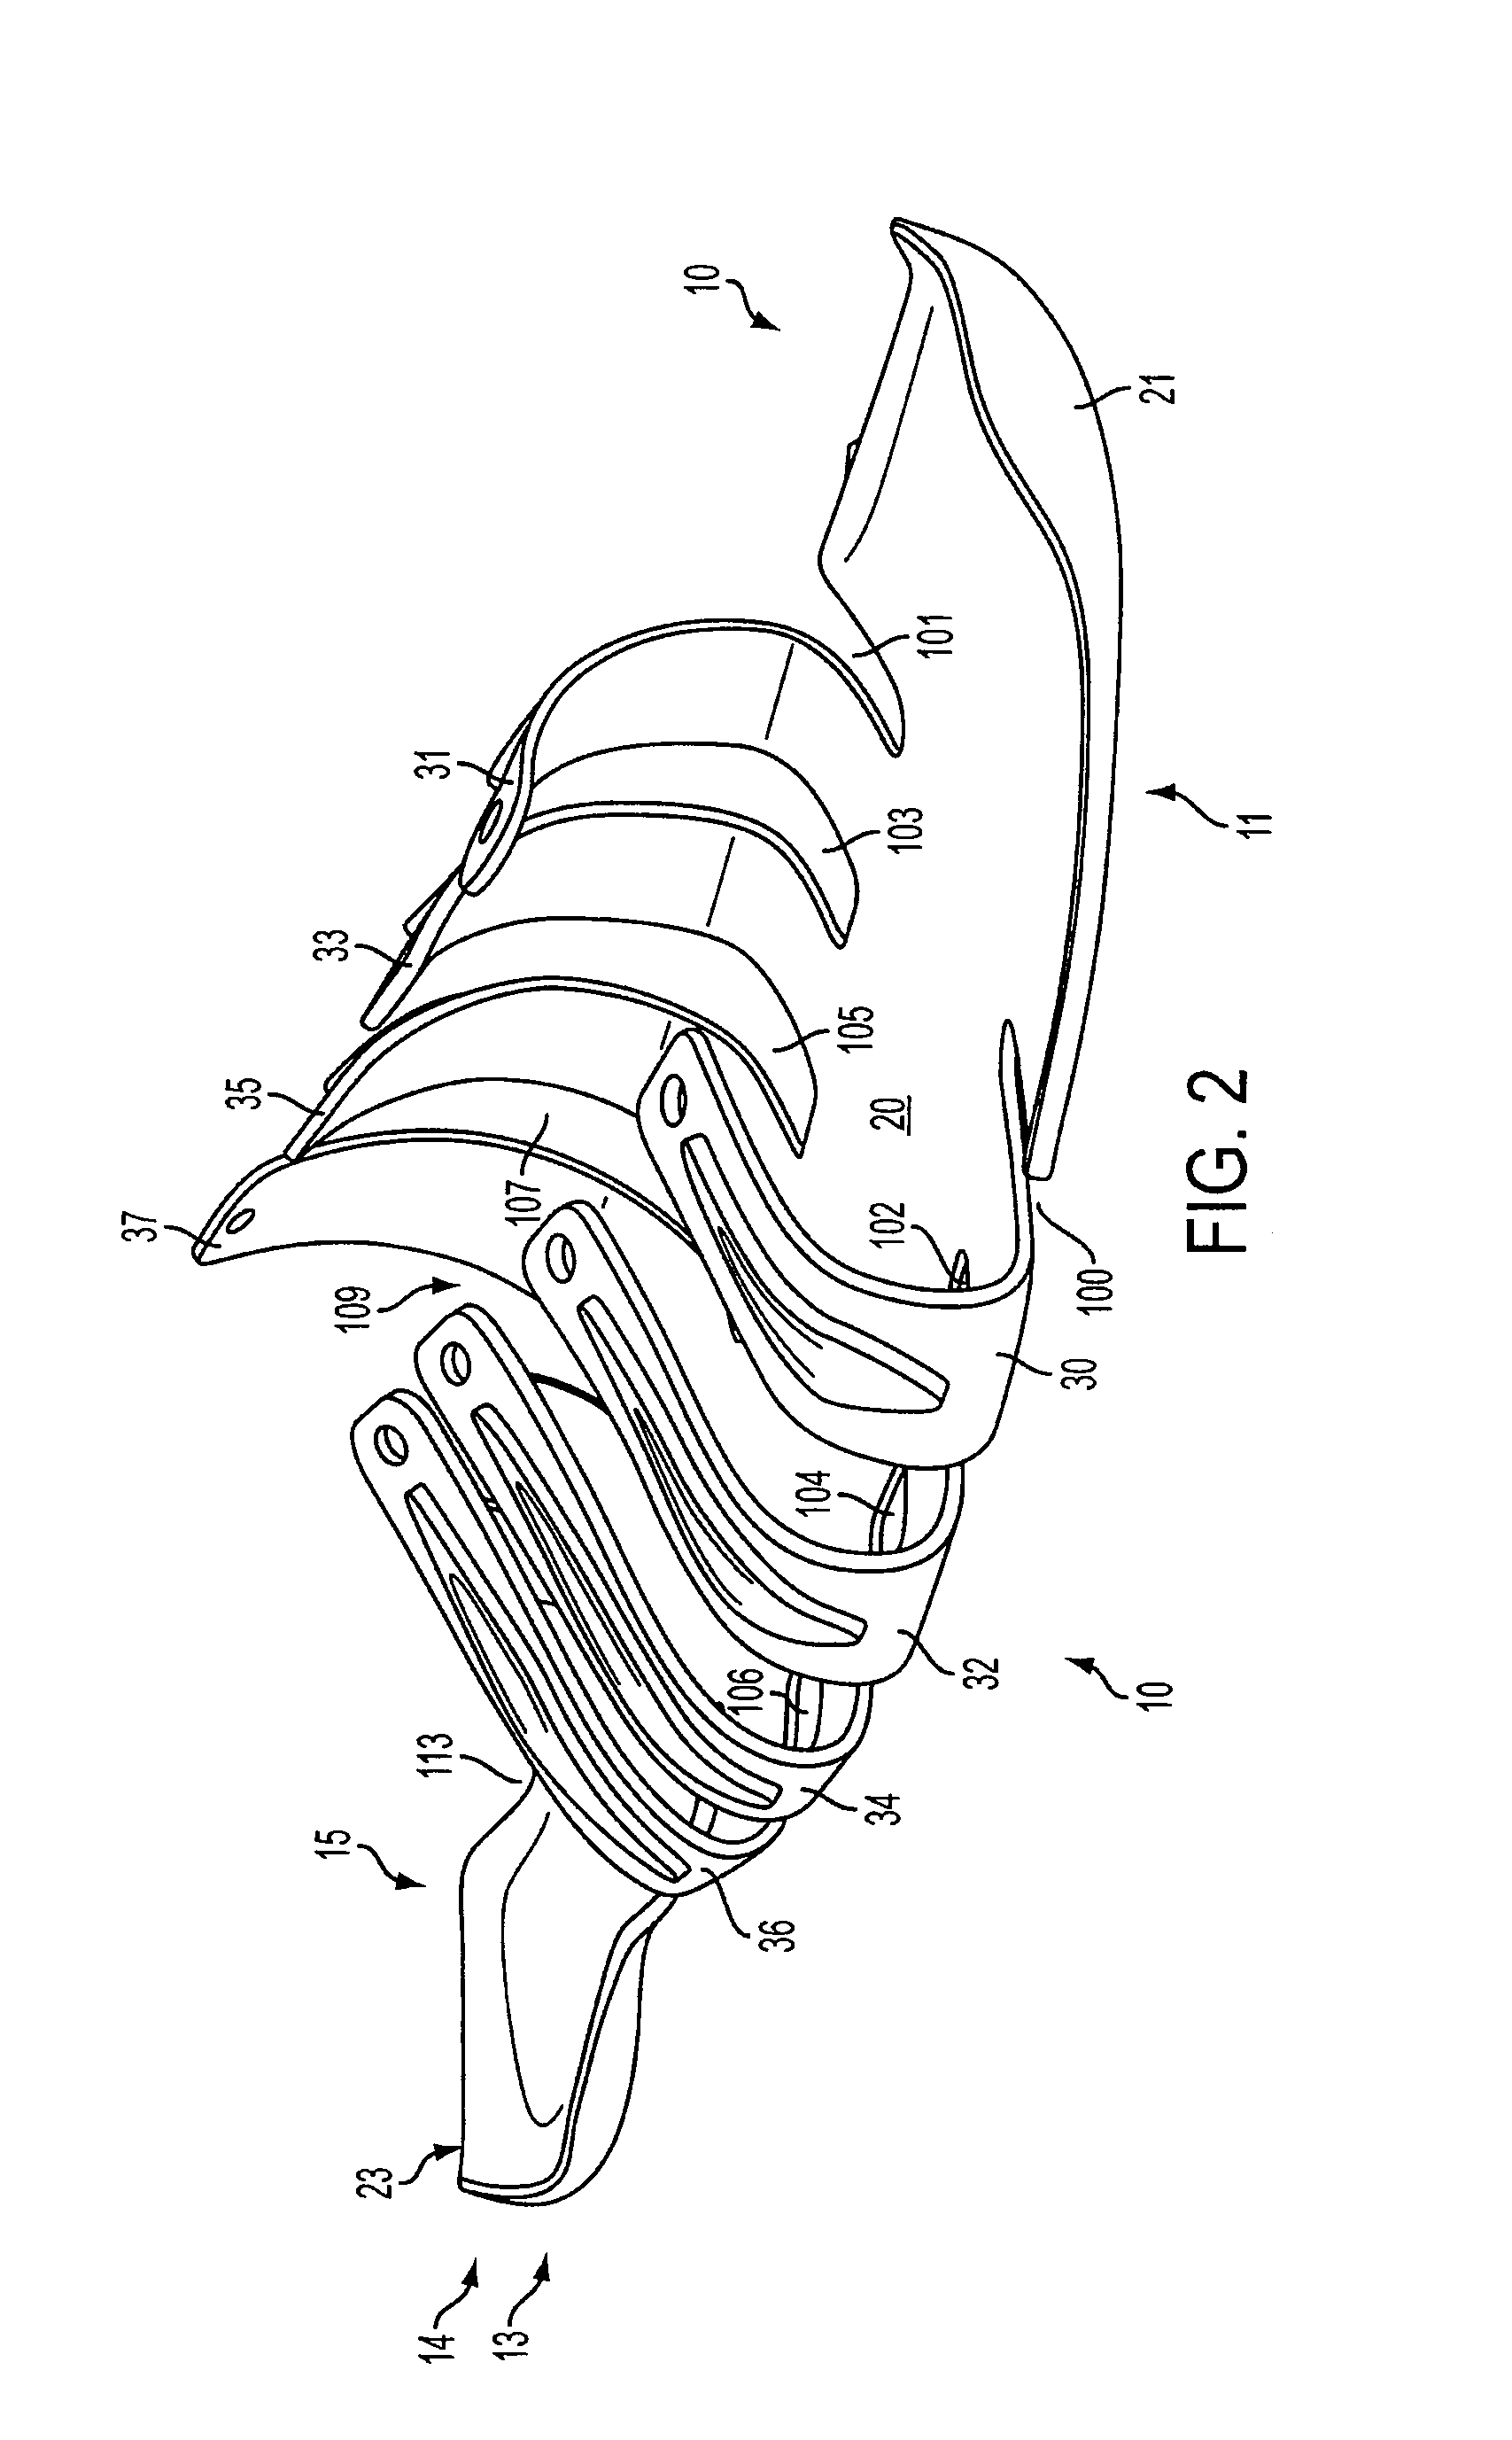 Footwear with a Foot Stabilizer